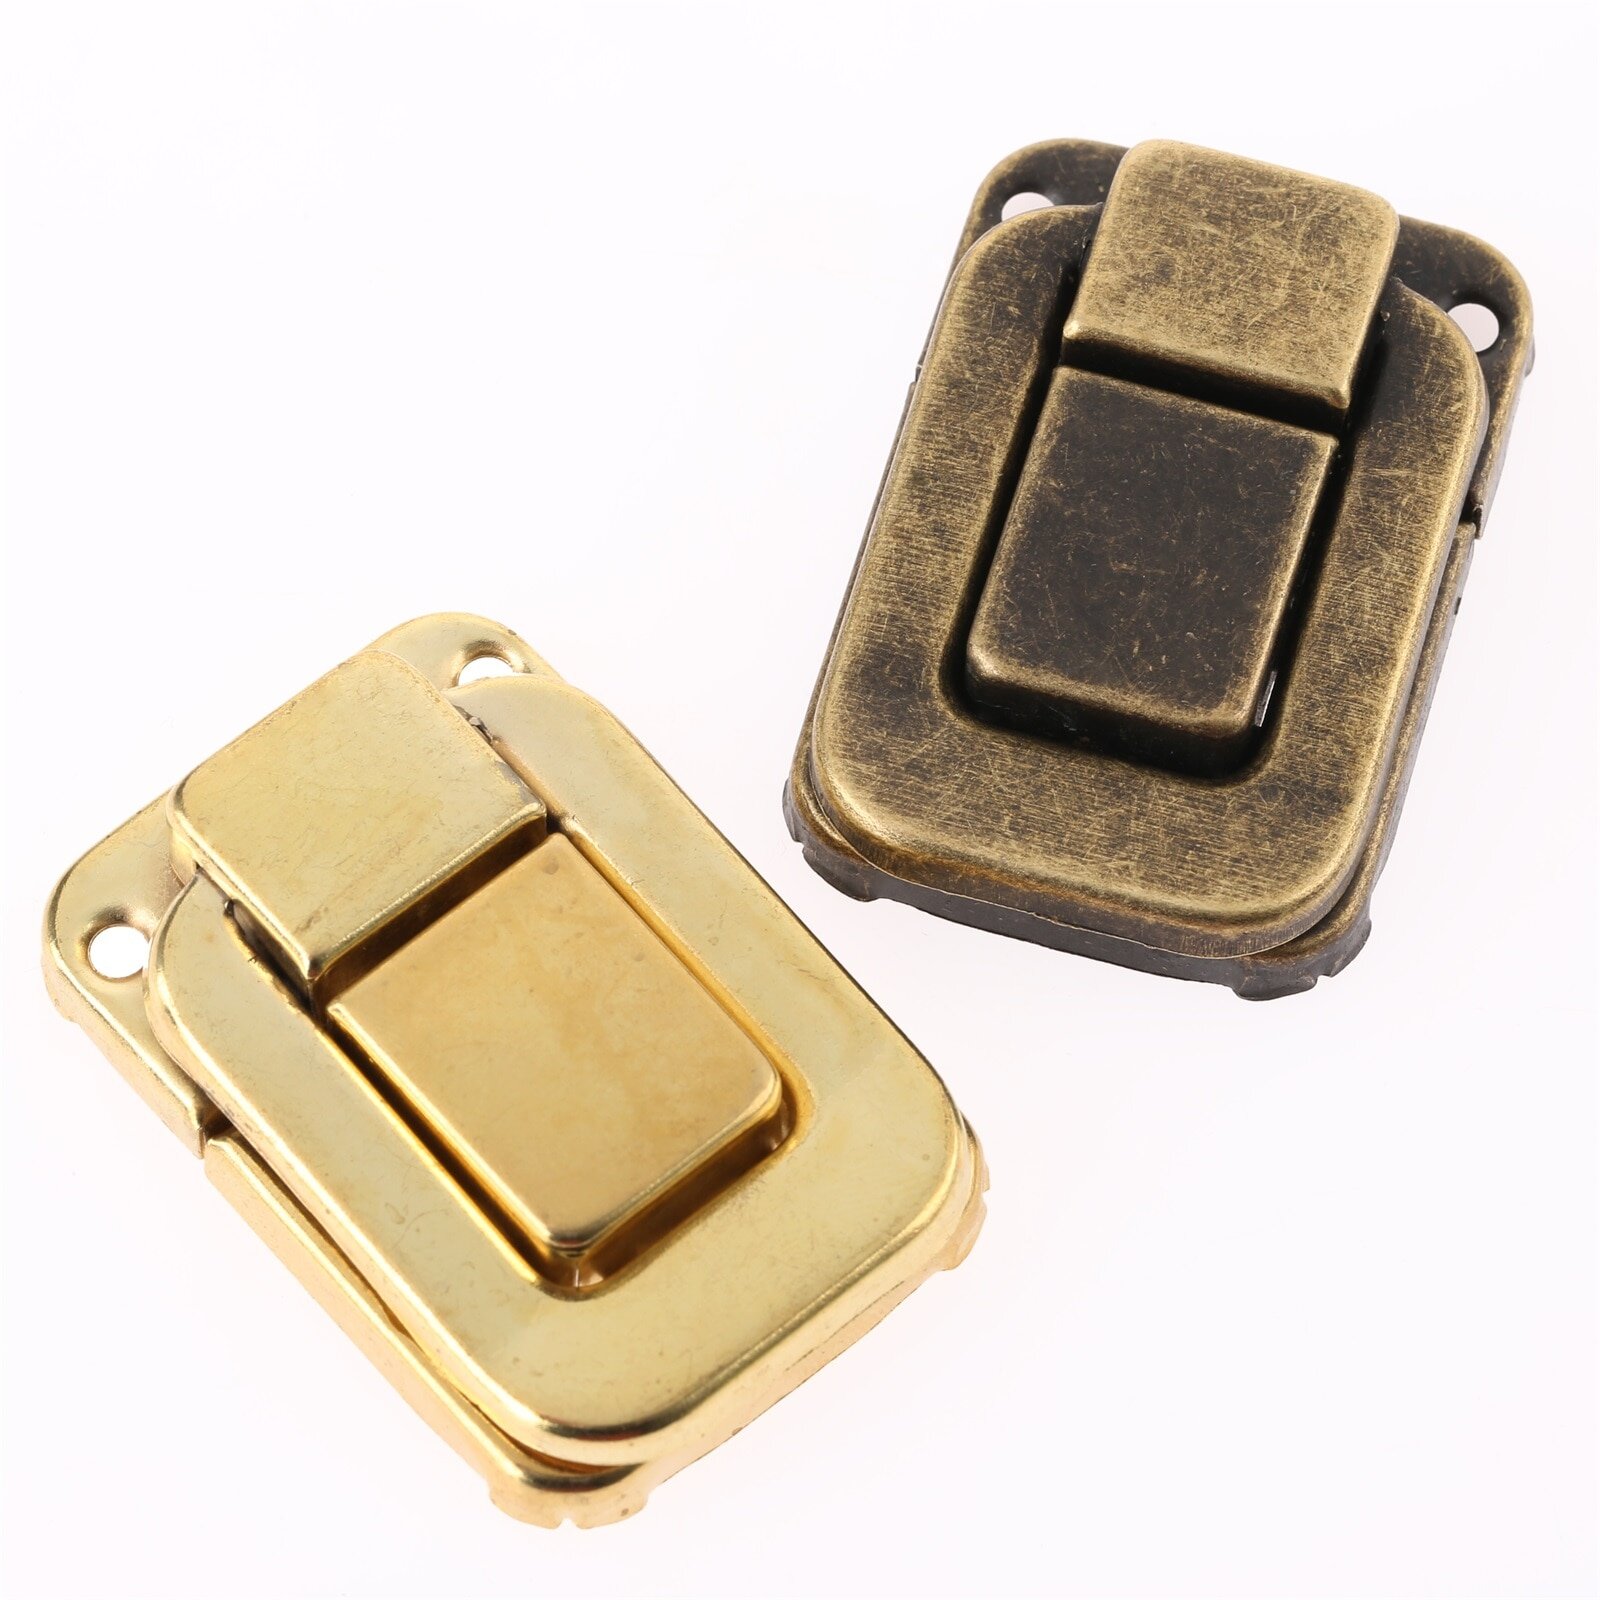 1x 48*32mm Lock Catch Latches for Jewelry Chest Box Suitcase Buckle Clip Clasp Vintage Hardware